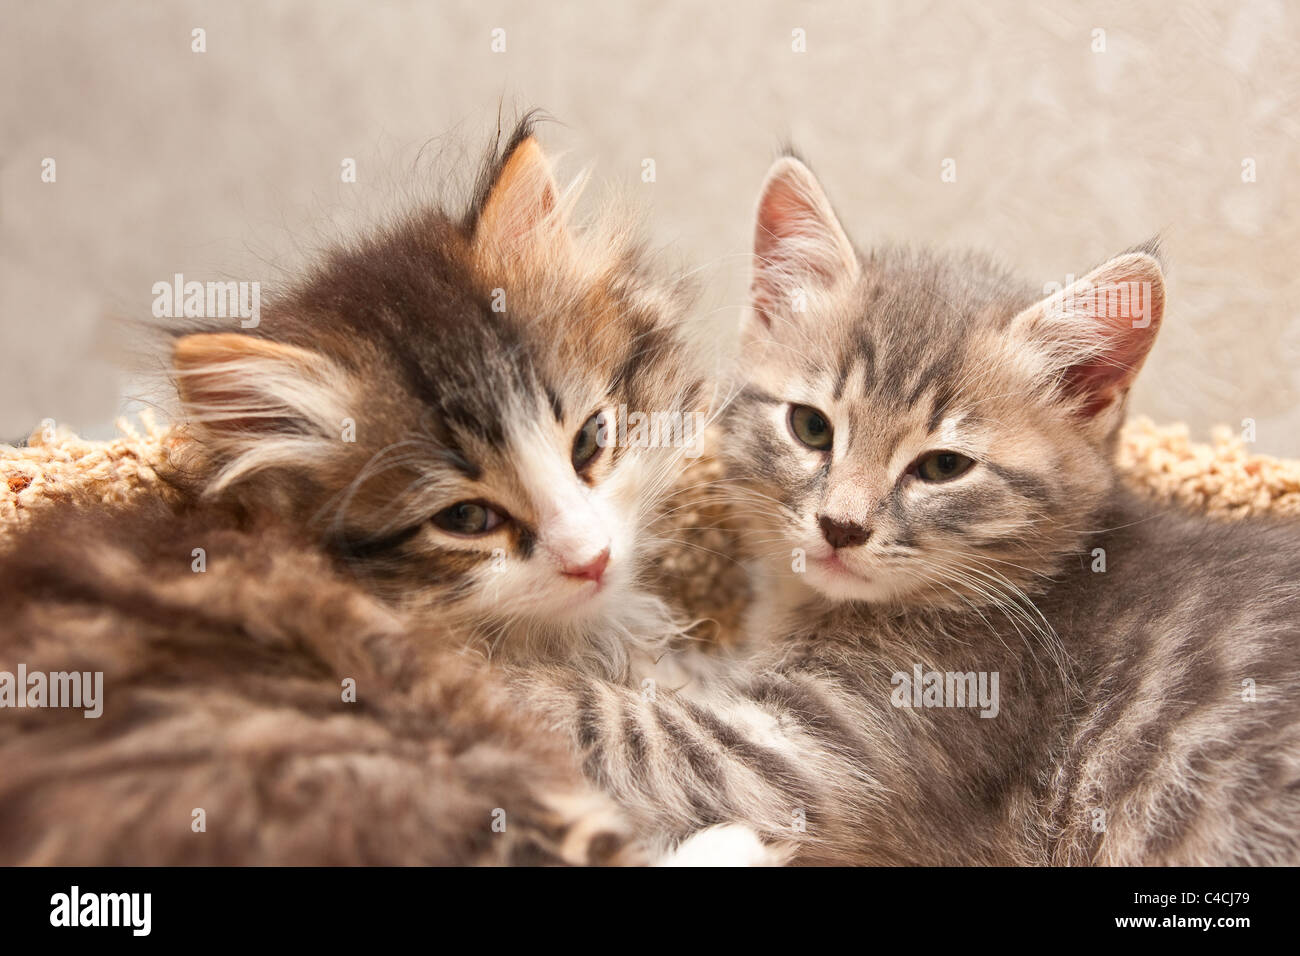 Two small kittens Stock Photo